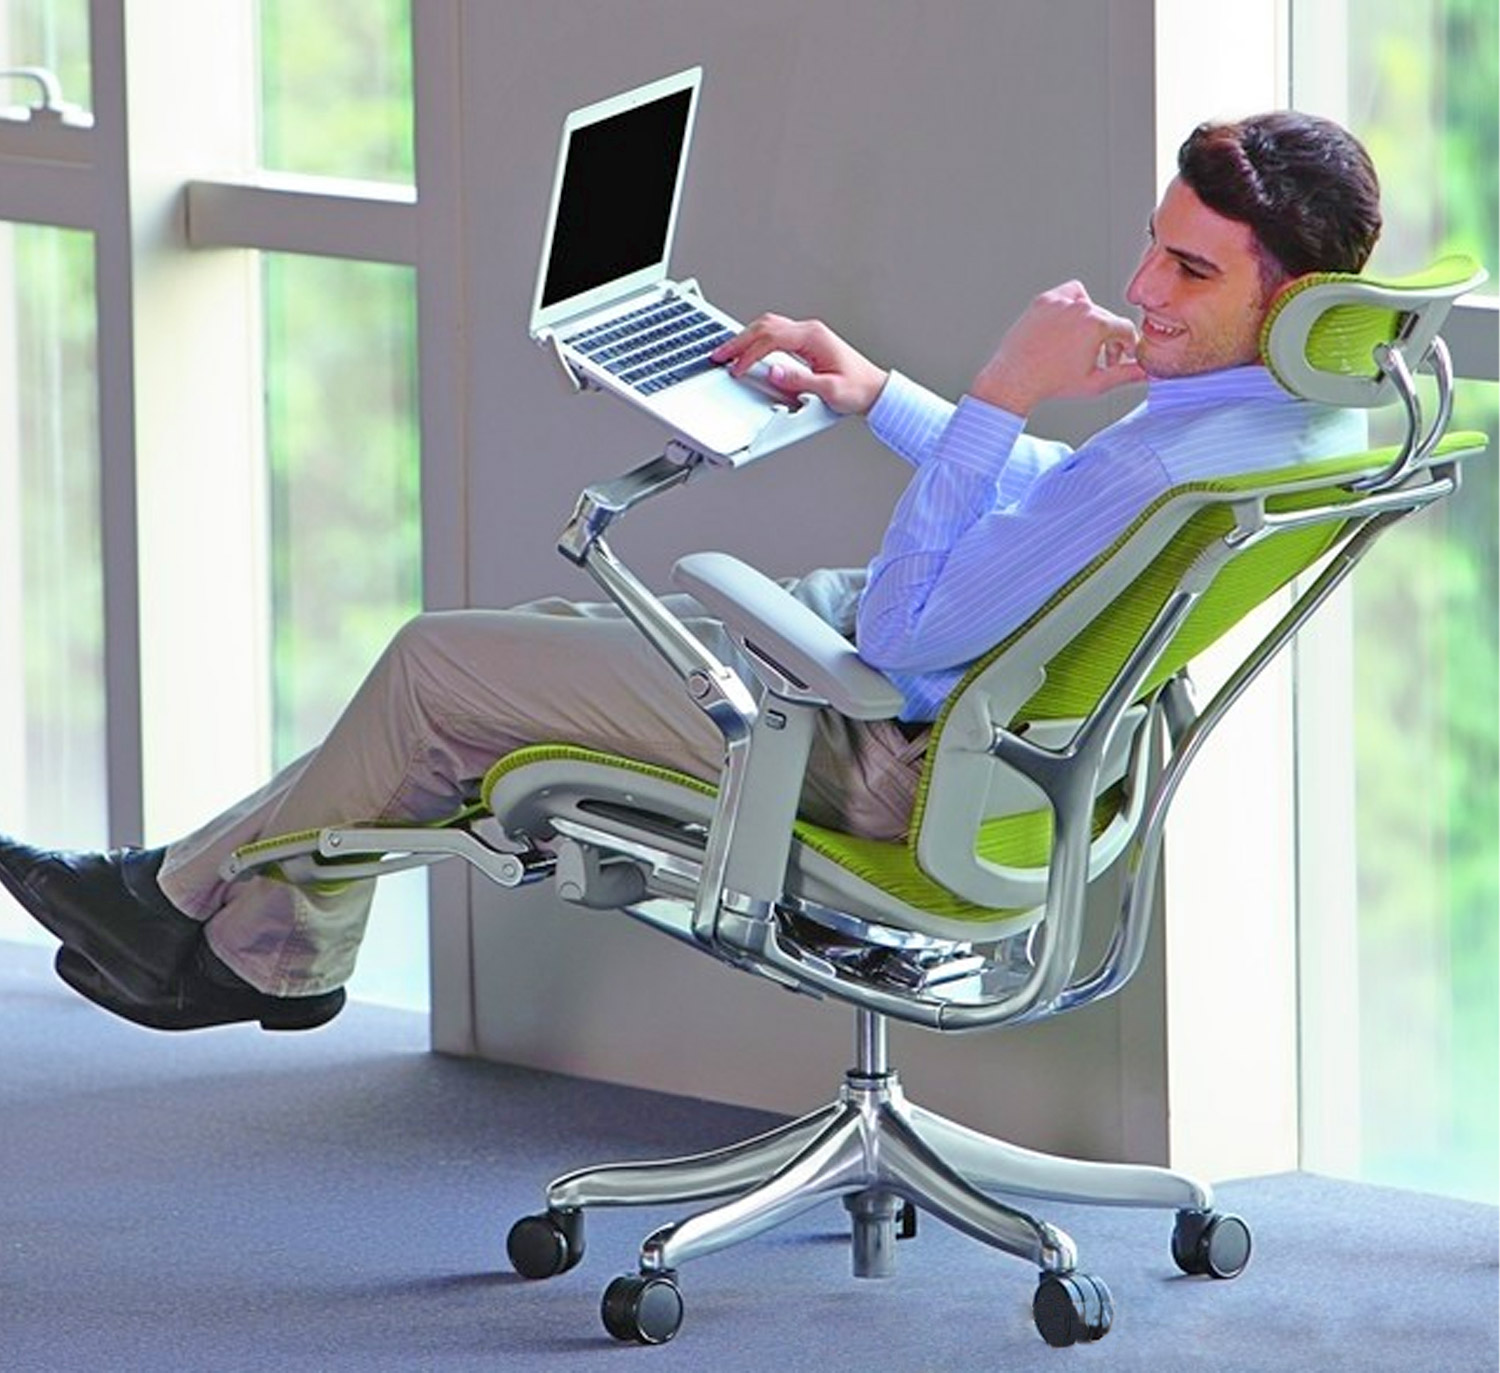 The Ultimate Office Chair With Laptop Mount And Leg Rests 0 